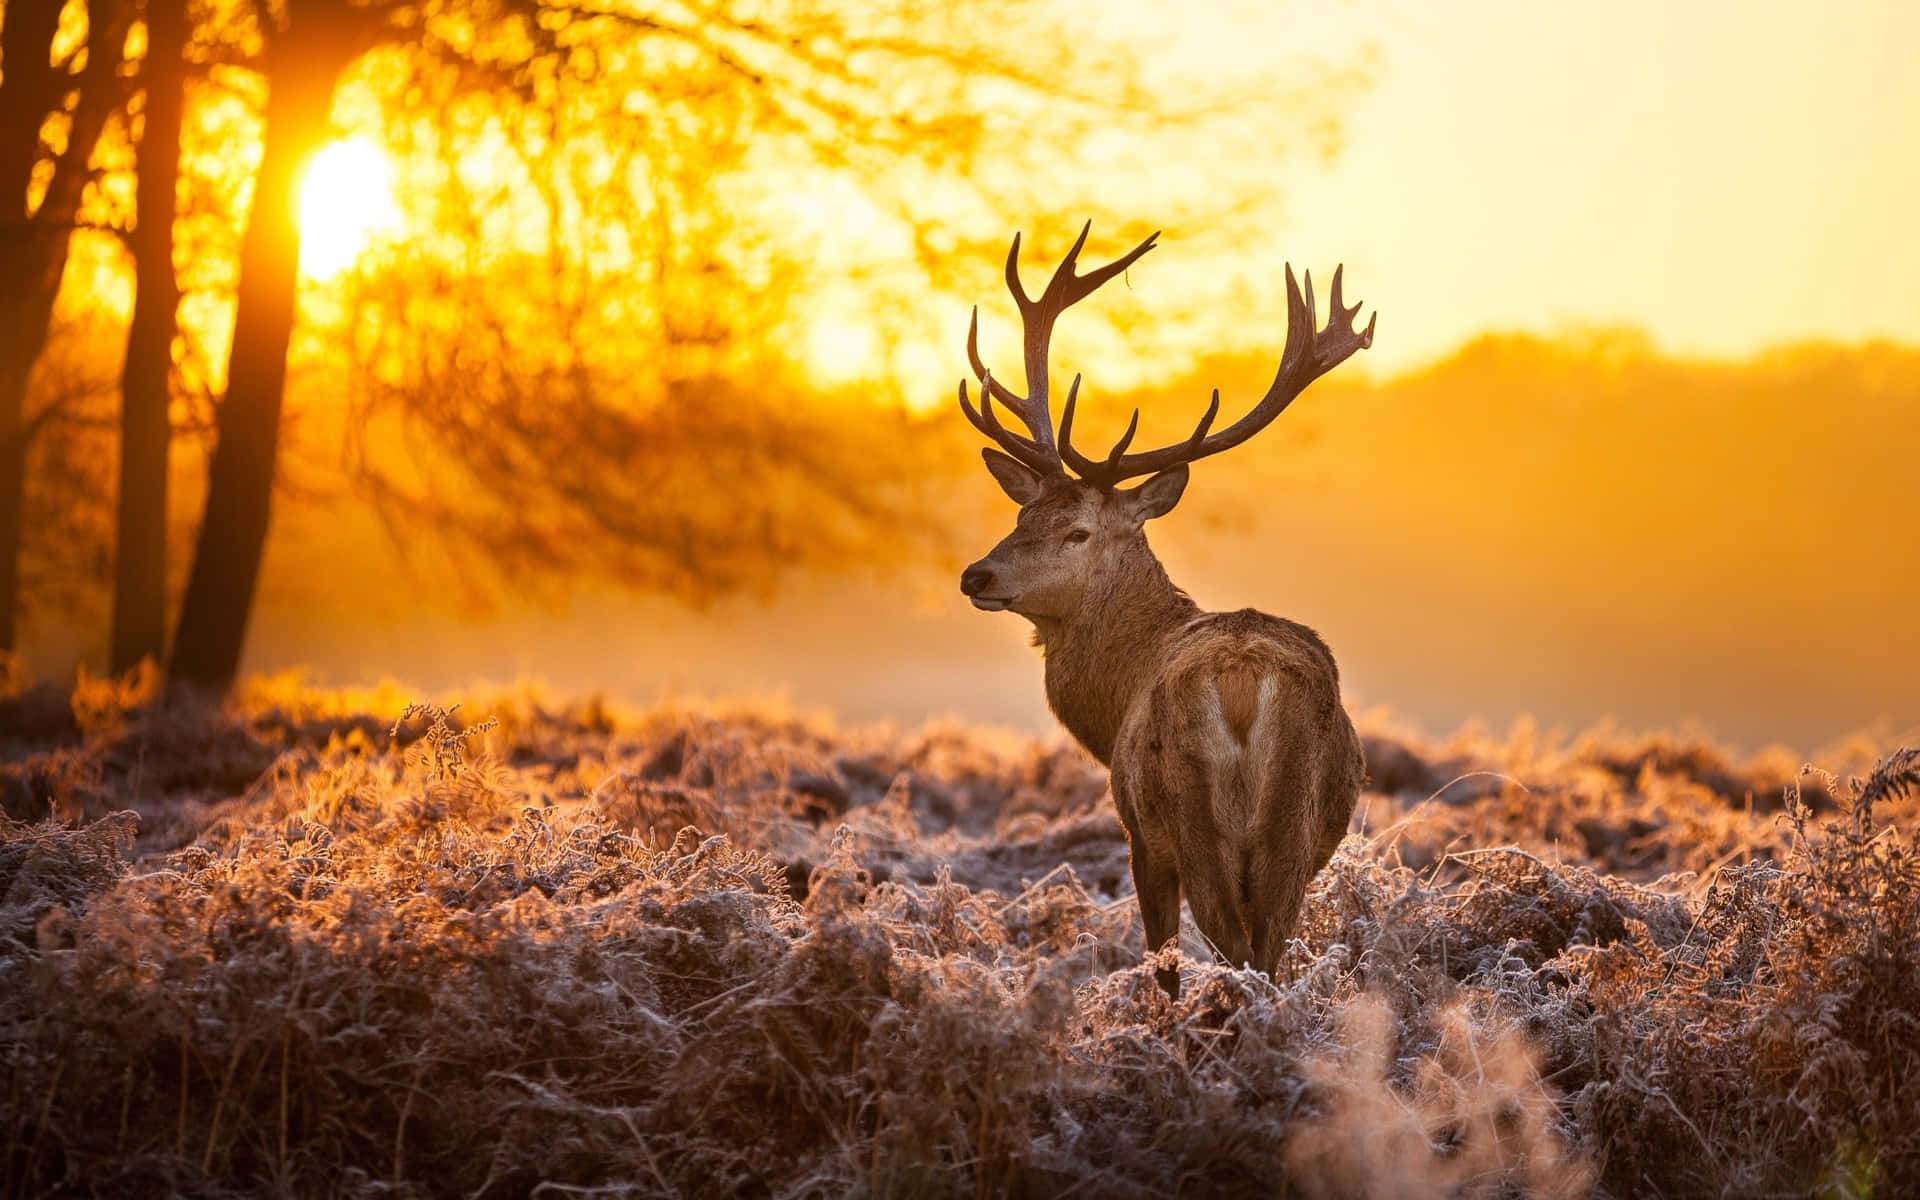 This majestic Cool Deer stands tall in the wilderness Wallpaper